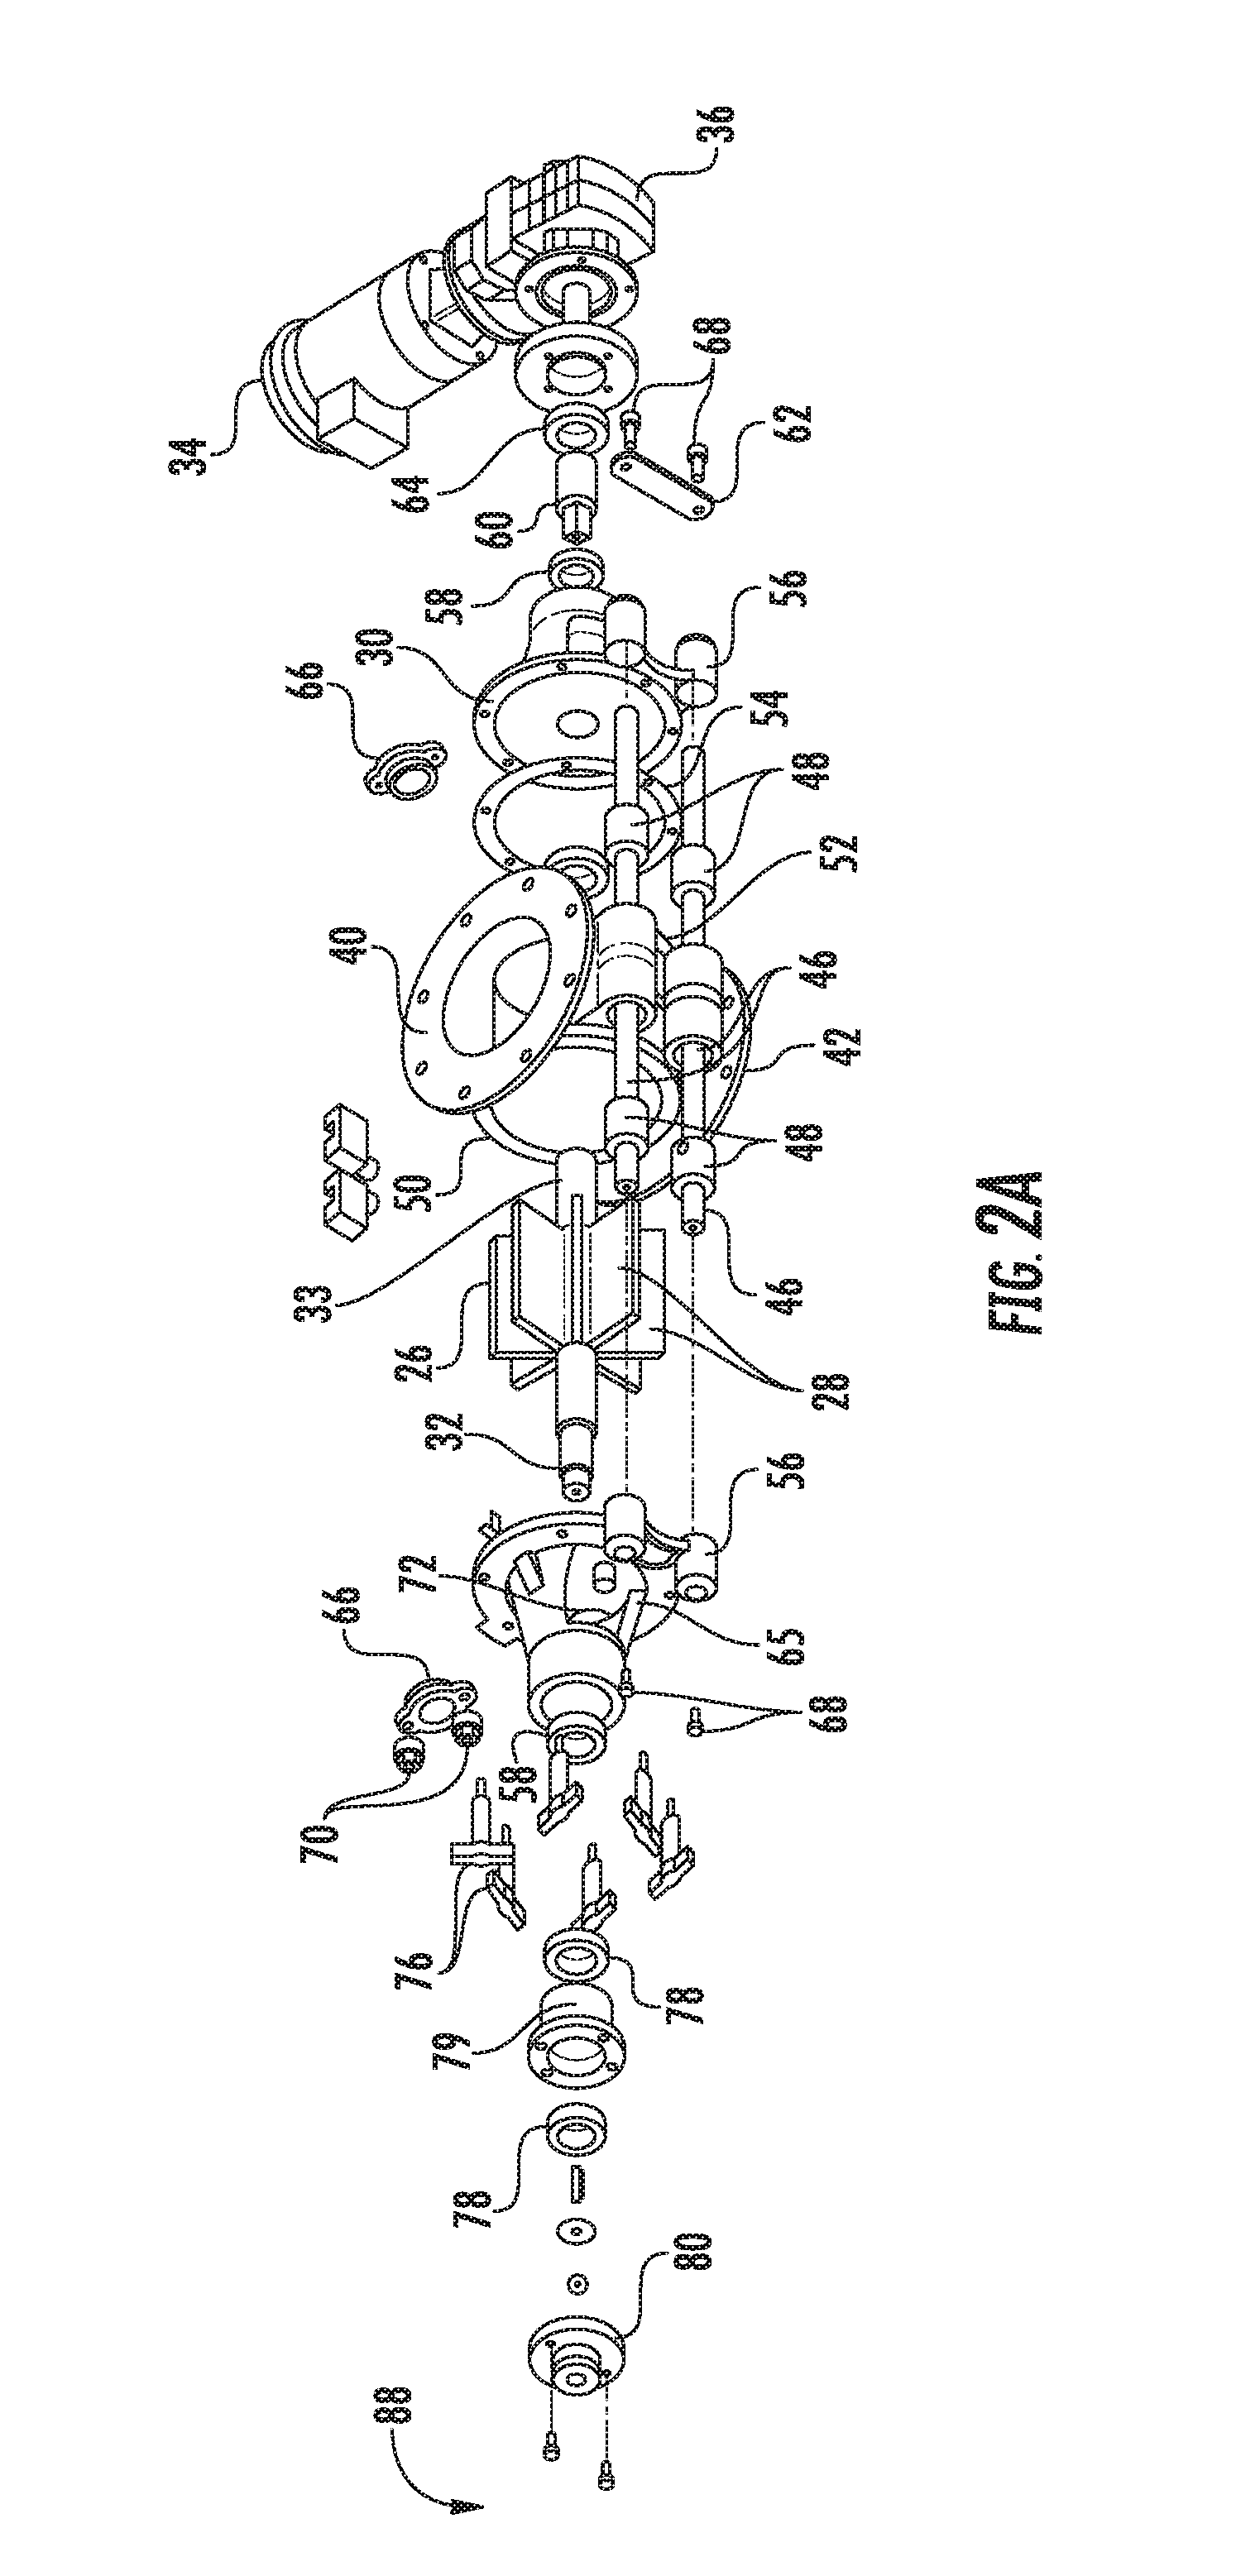 Rotary Valve Seal Pressure and Indicator System